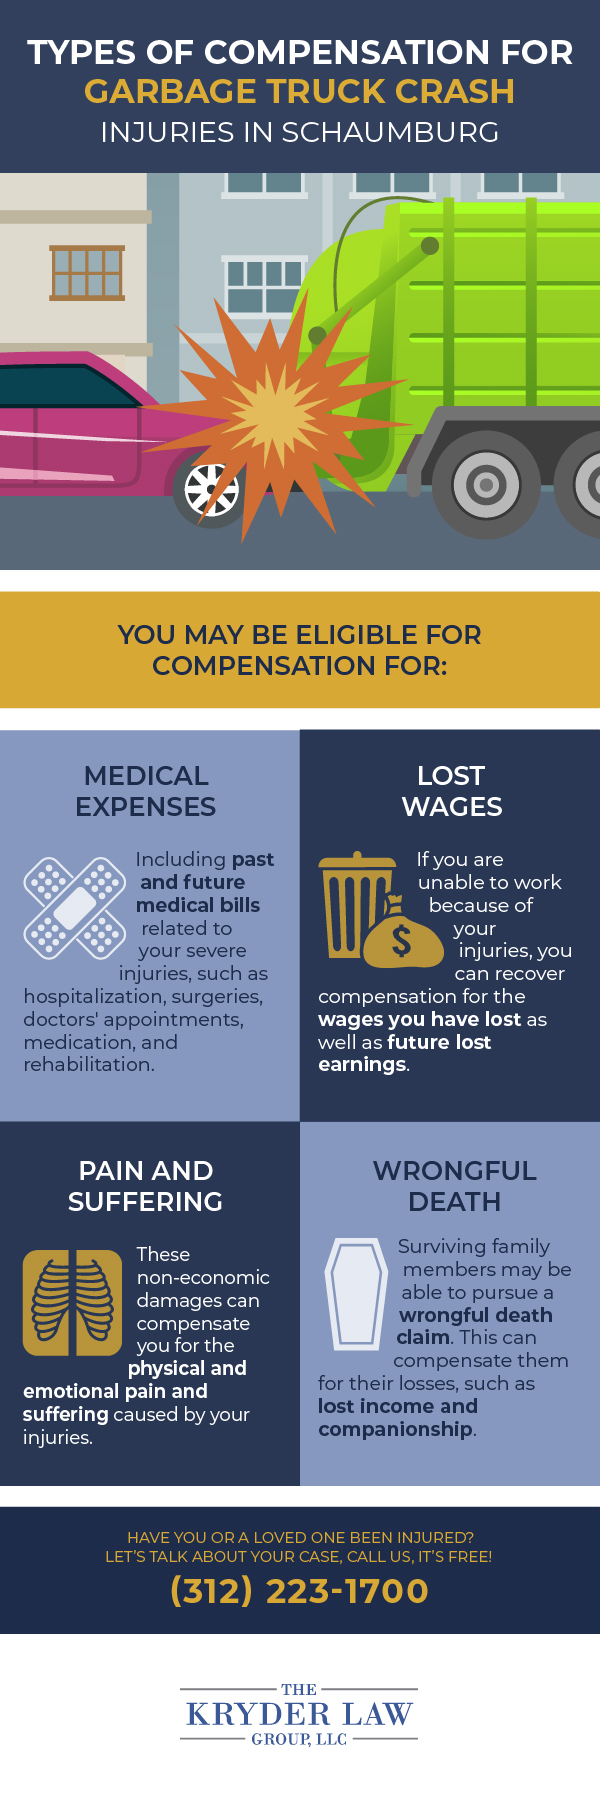 Types of Compensation for Garbage Truck Crash Injuries in Schaumburg Infographic